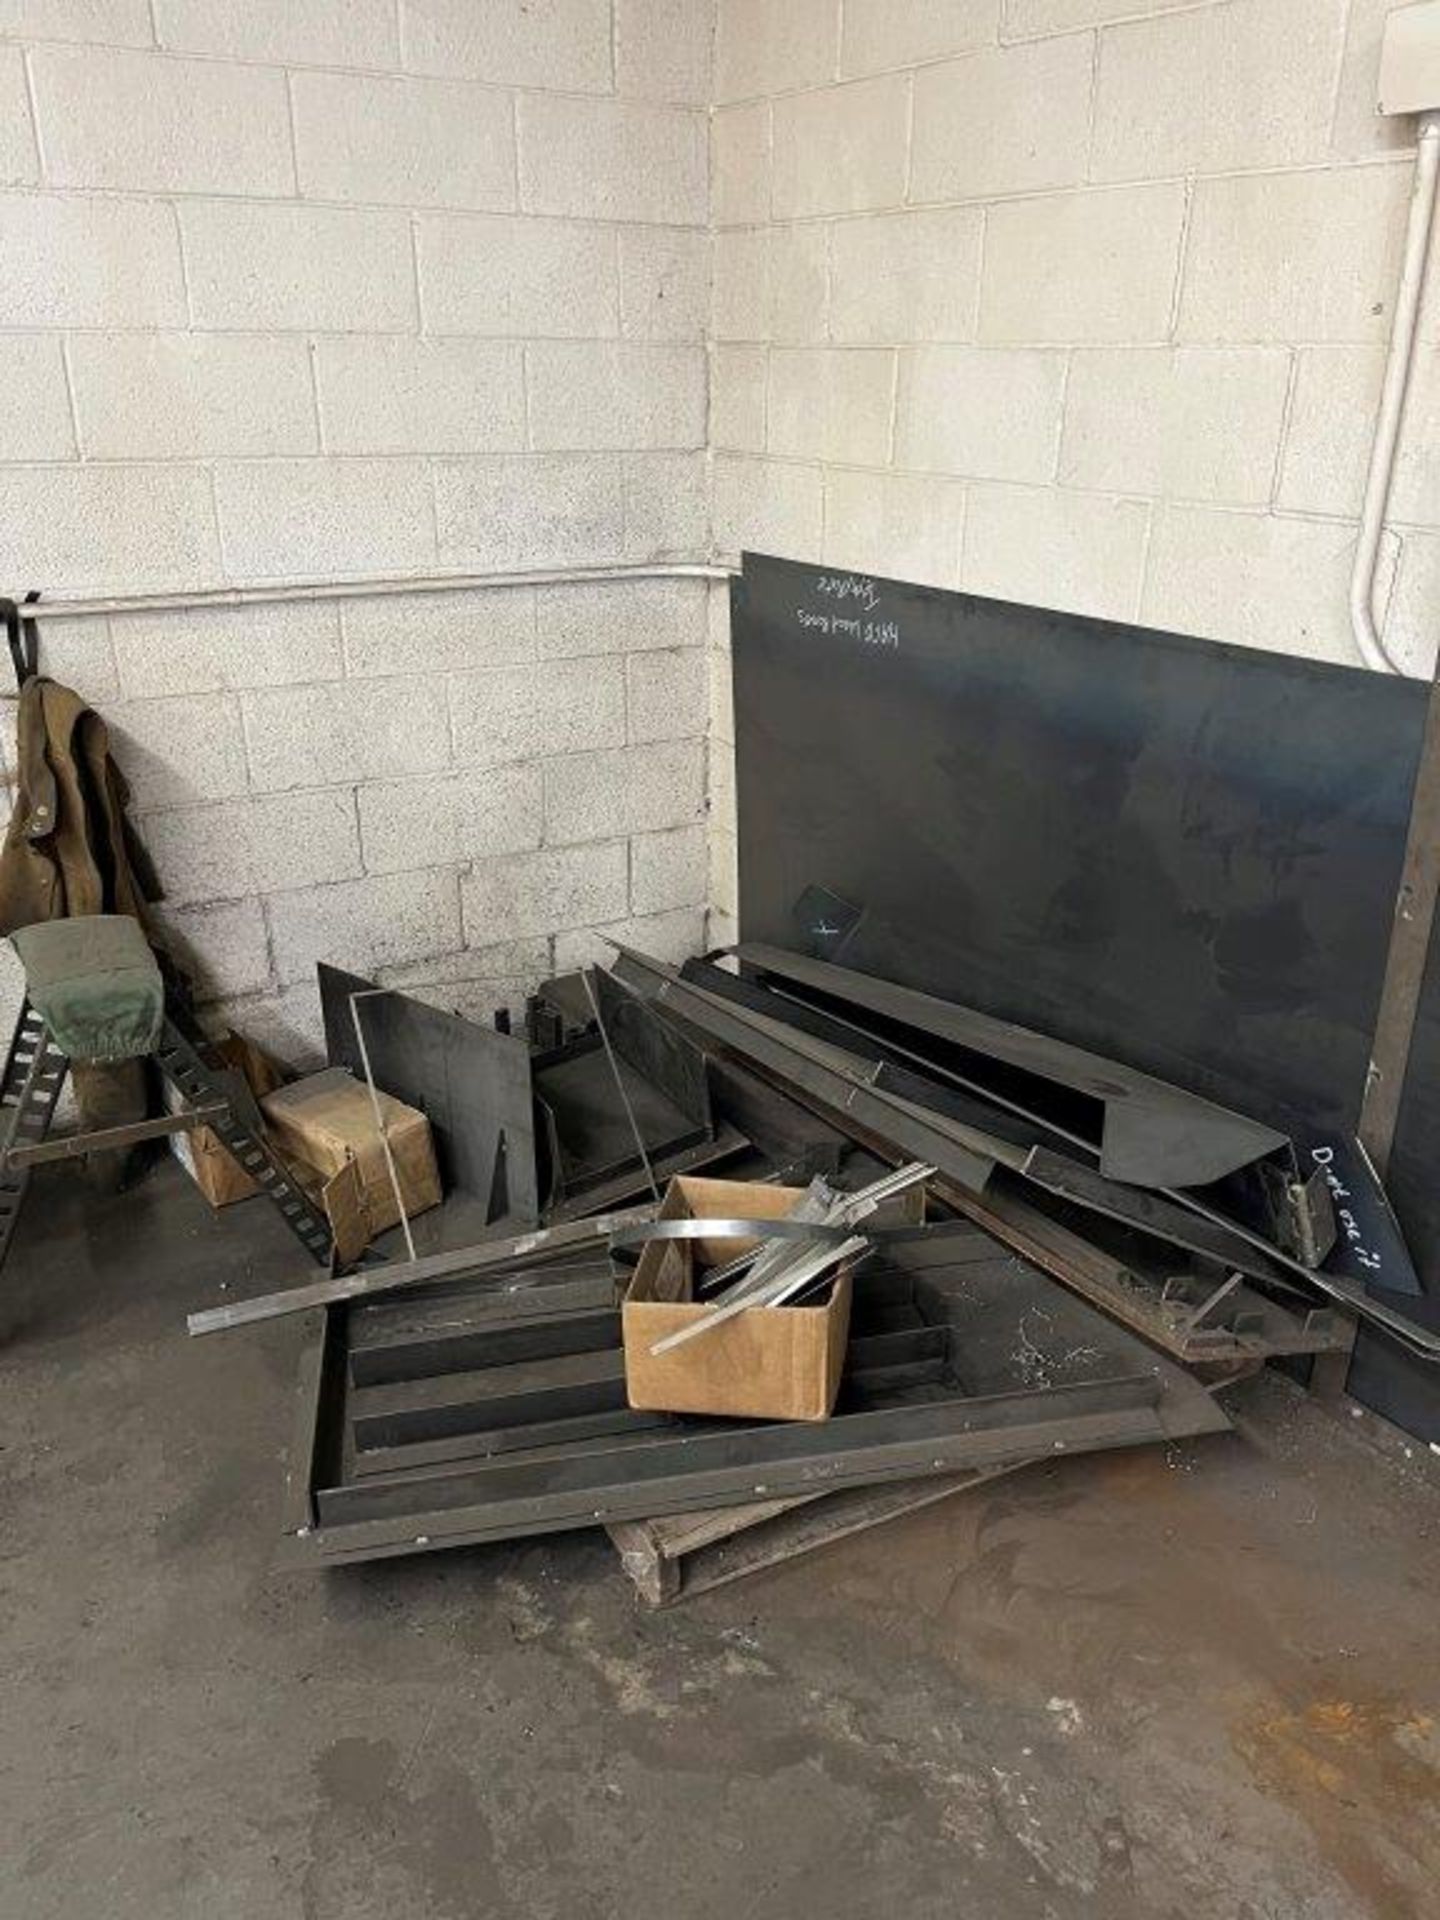 Lot of Assorted Steel Carts, Stands, Saw Horses and Misc. - Image 2 of 5